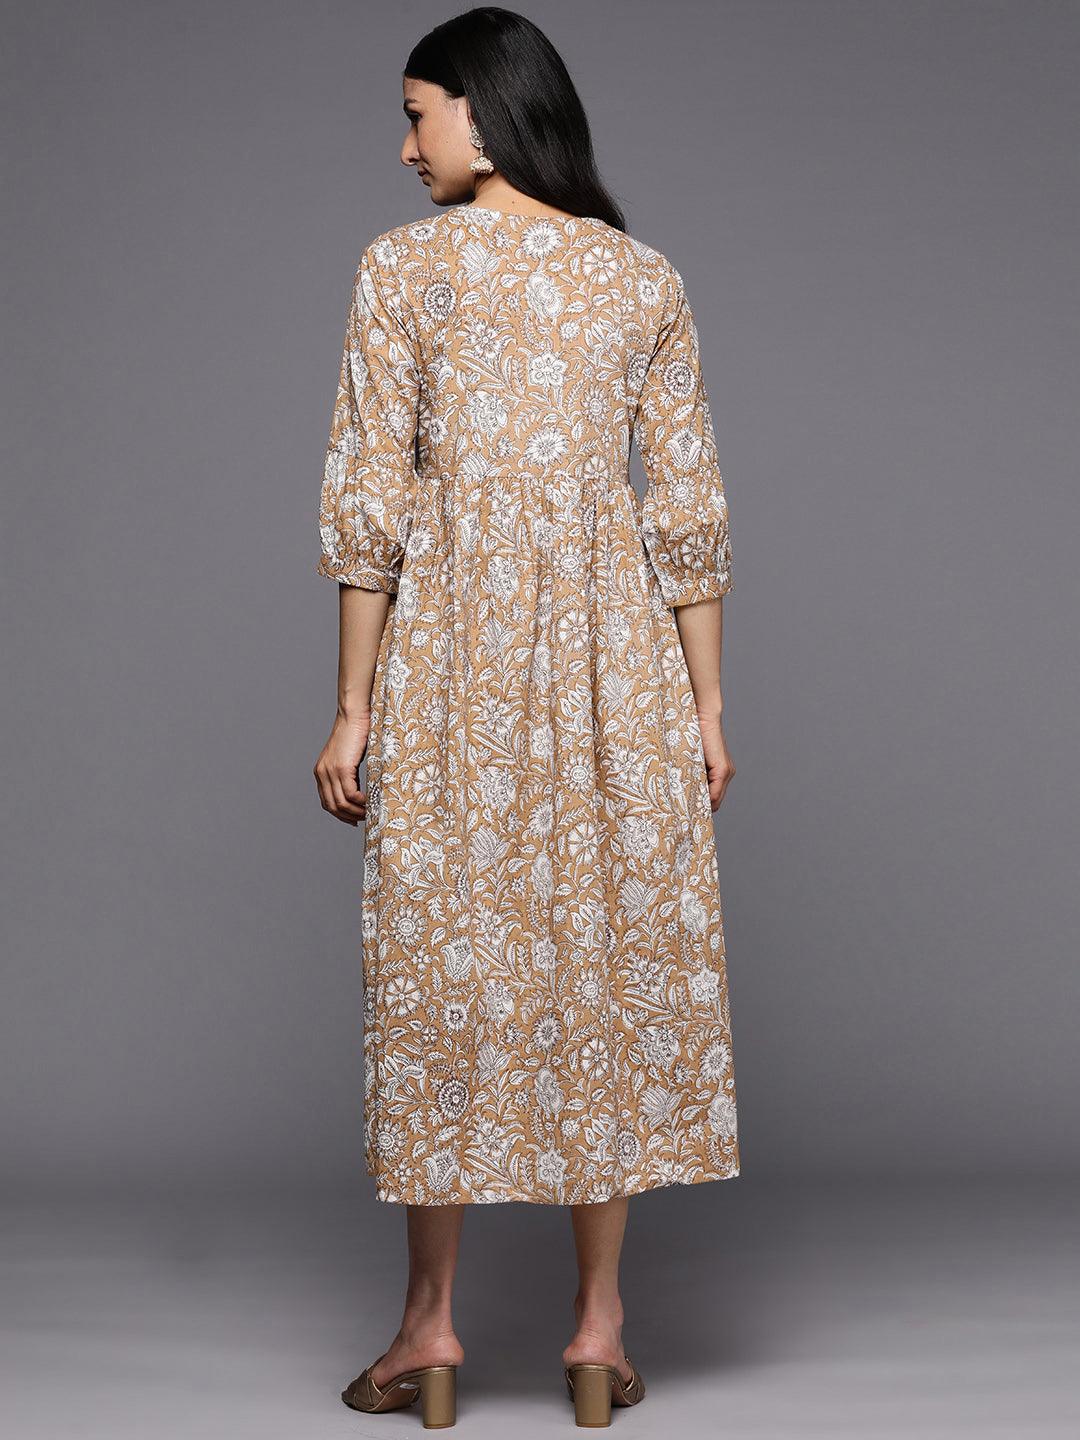 Camel Brown Printed Cotton Empire Dress